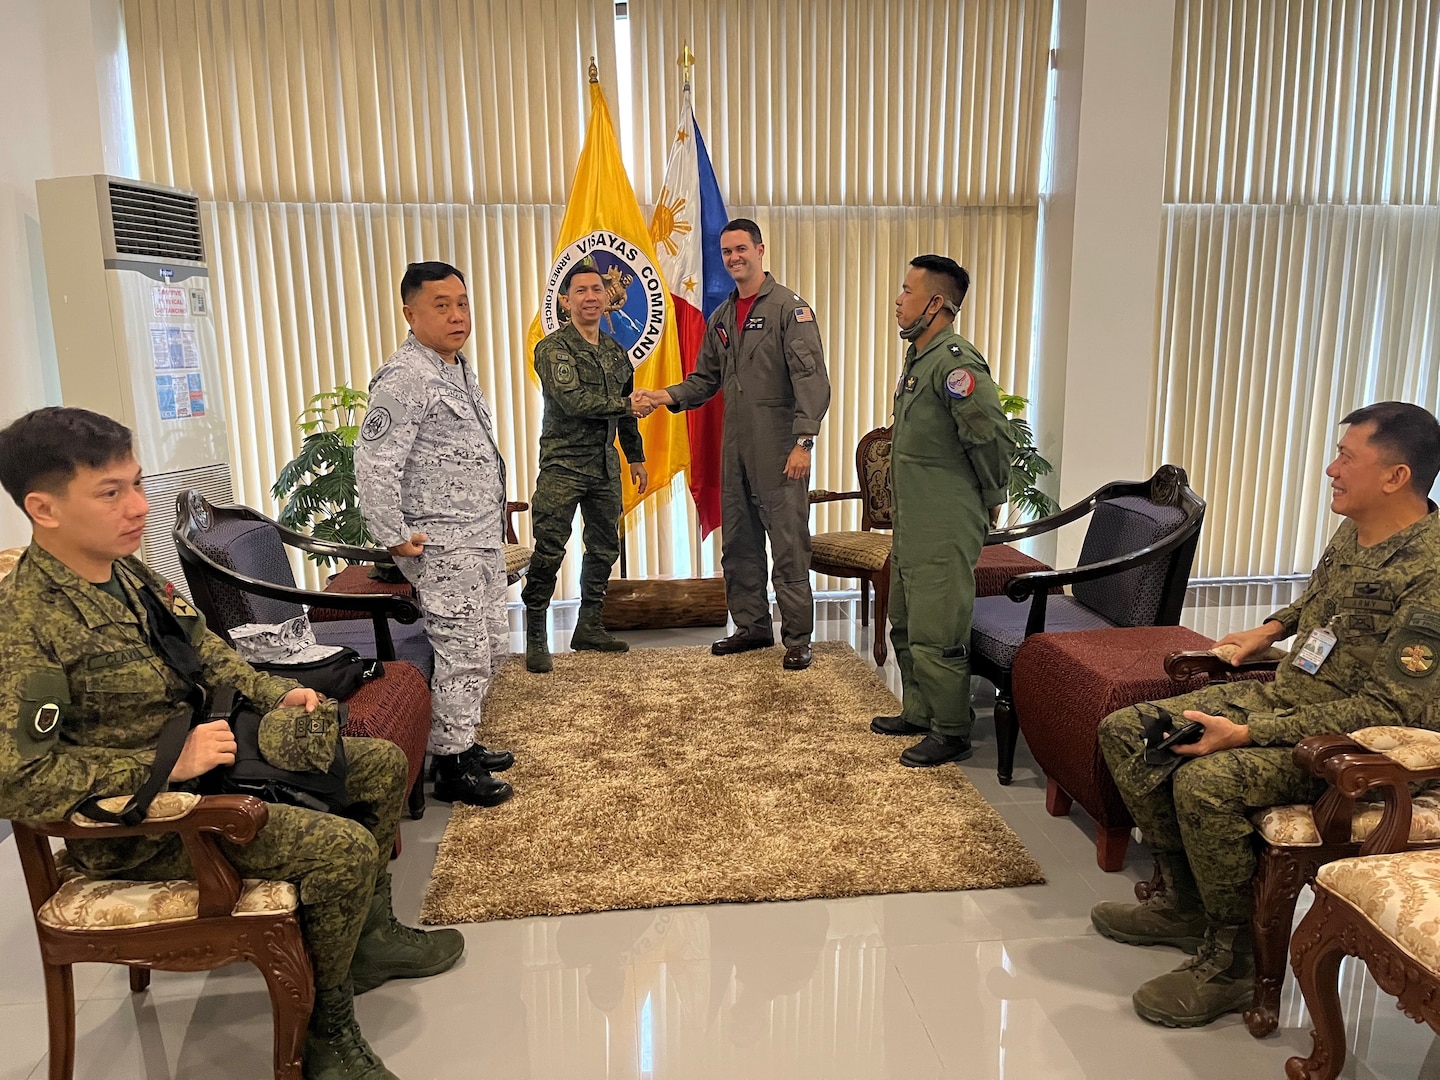 Lt. Gen. Benedict M. Arevalo, Philippine Visayas Commander and Army 3rd Infantry Division, and Cmdr. Marc Hines, commanding officer of the “Red Lancers” of Patrol Squadron (VP) 10, shake hands during a meeting as part of a weeklong engagement promoting joint regional security and partnerships out of Mactan, Philippines. VP-10 is based in Jacksonville, Florida and is currently operating from Kadena Air Base in Okinawa, Japan. It conducts maritime patrol and reconnaissance, as well as theater outreach operations, as part of a rotational deployment to the U.S. 7th Fleet area of operations. (U.S. Navy photo by Lt. j.g. Travis Goebel)